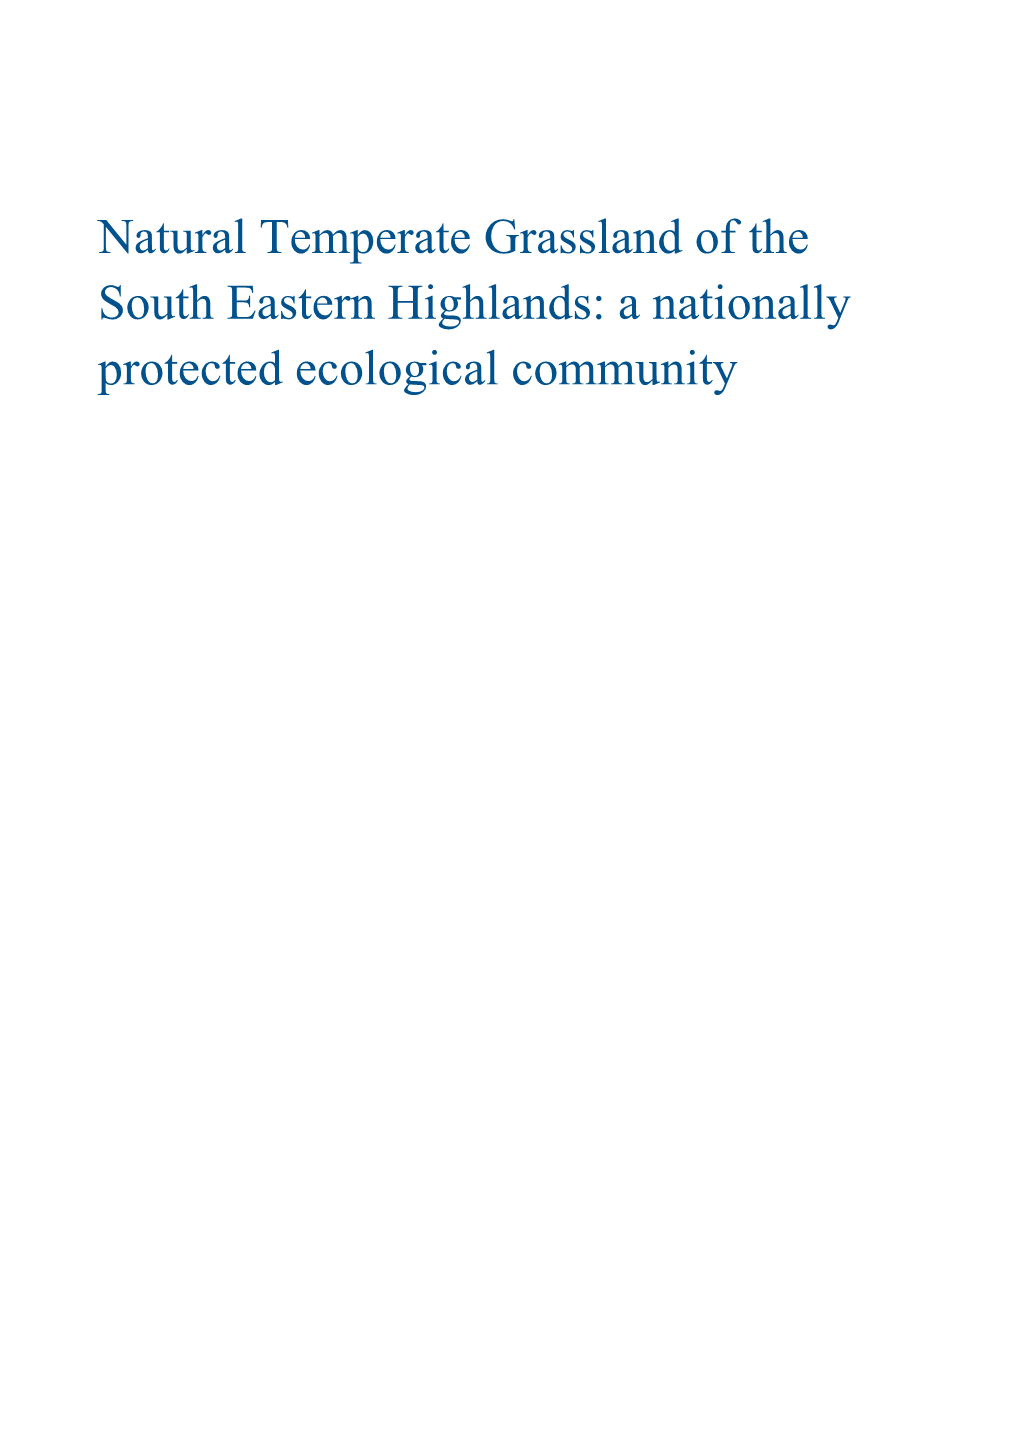 Natural Temperate Grassland of the South Eastern Highlands: a Nationally Protected Ecological